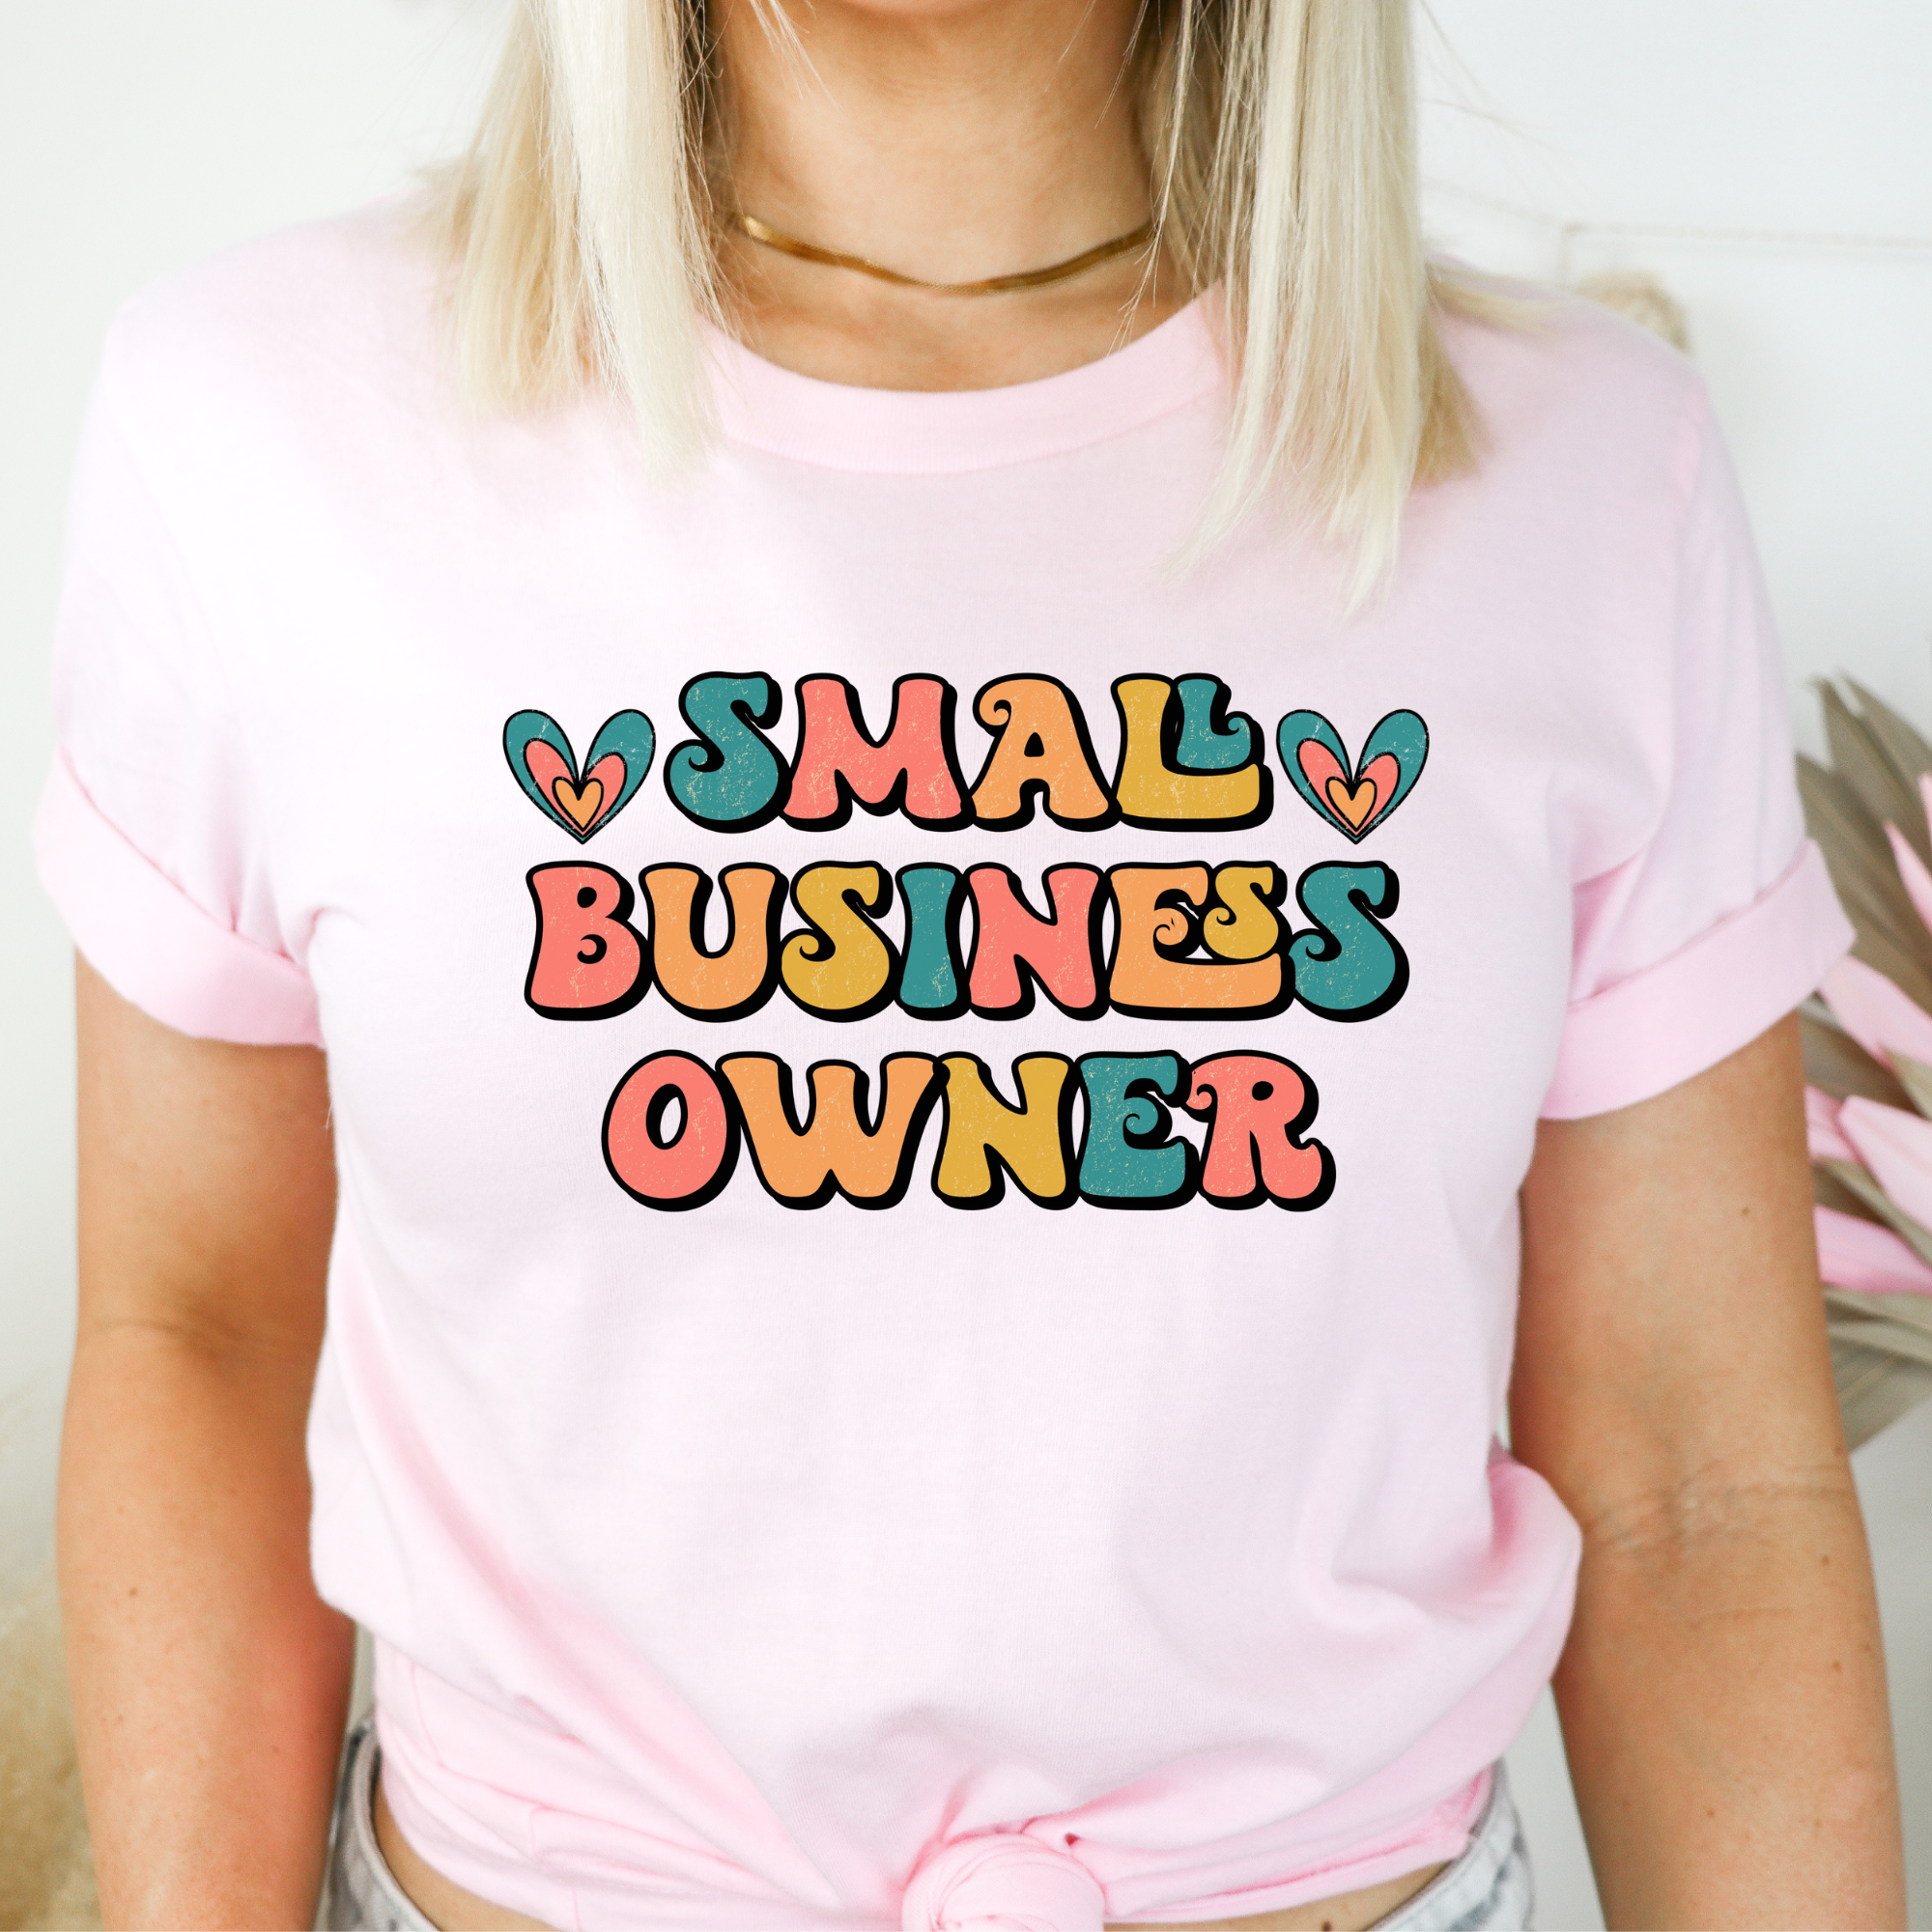 Small Business Owner TShirt *UNISEX FIT*-Graphic Tees-208 Tees Wholesale, Idaho